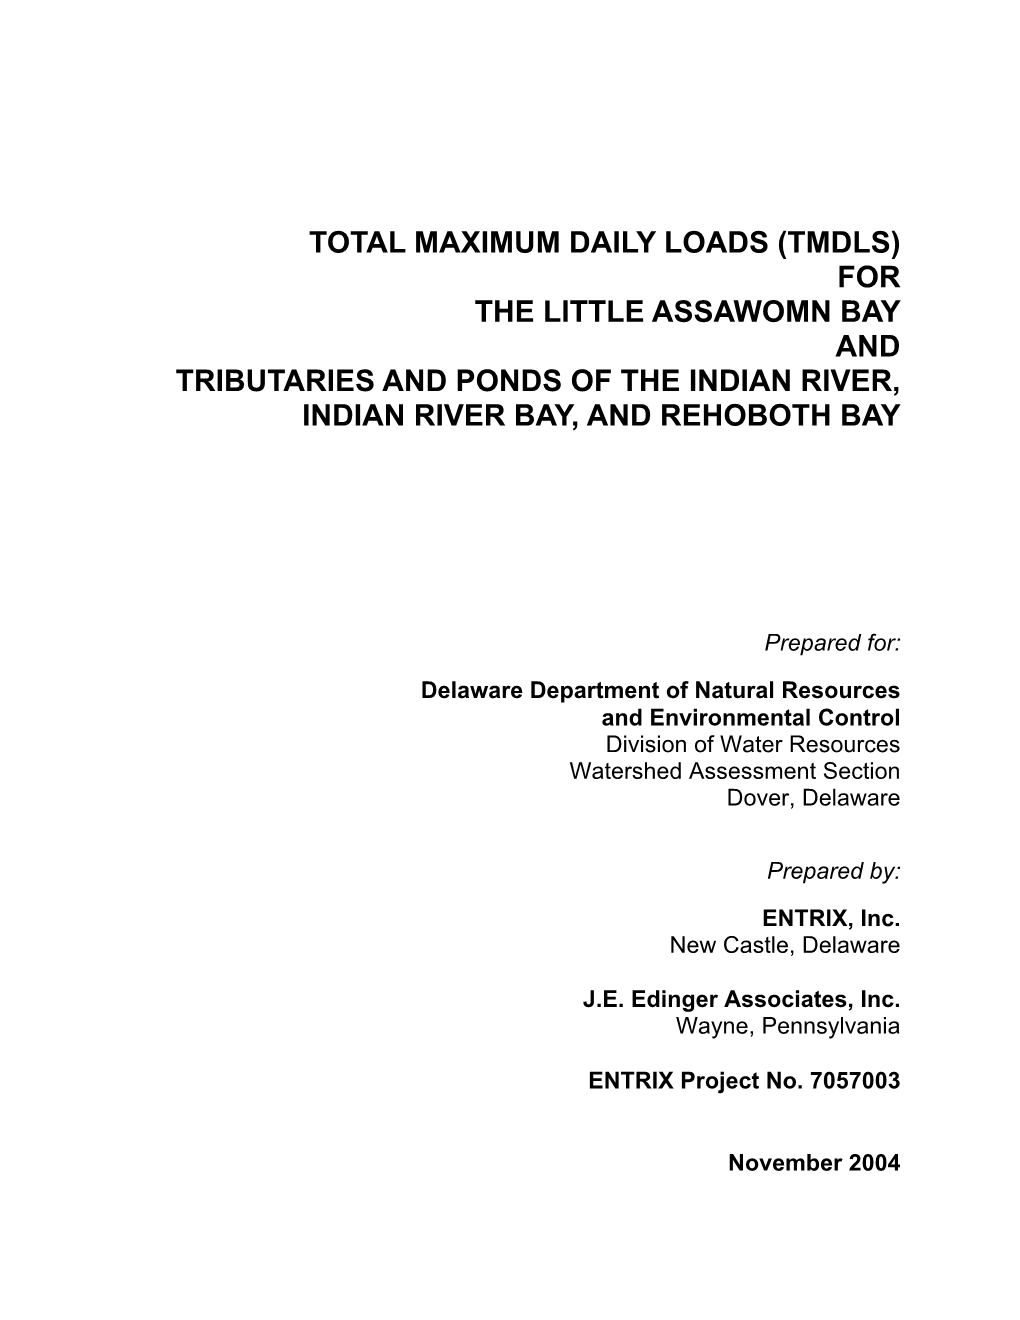 Total Maximum Daily Loads (Tmdls) for the Little Assawomn Bay and Tributaries and Ponds of the Indian River, Indian River Bay, and Rehoboth Bay